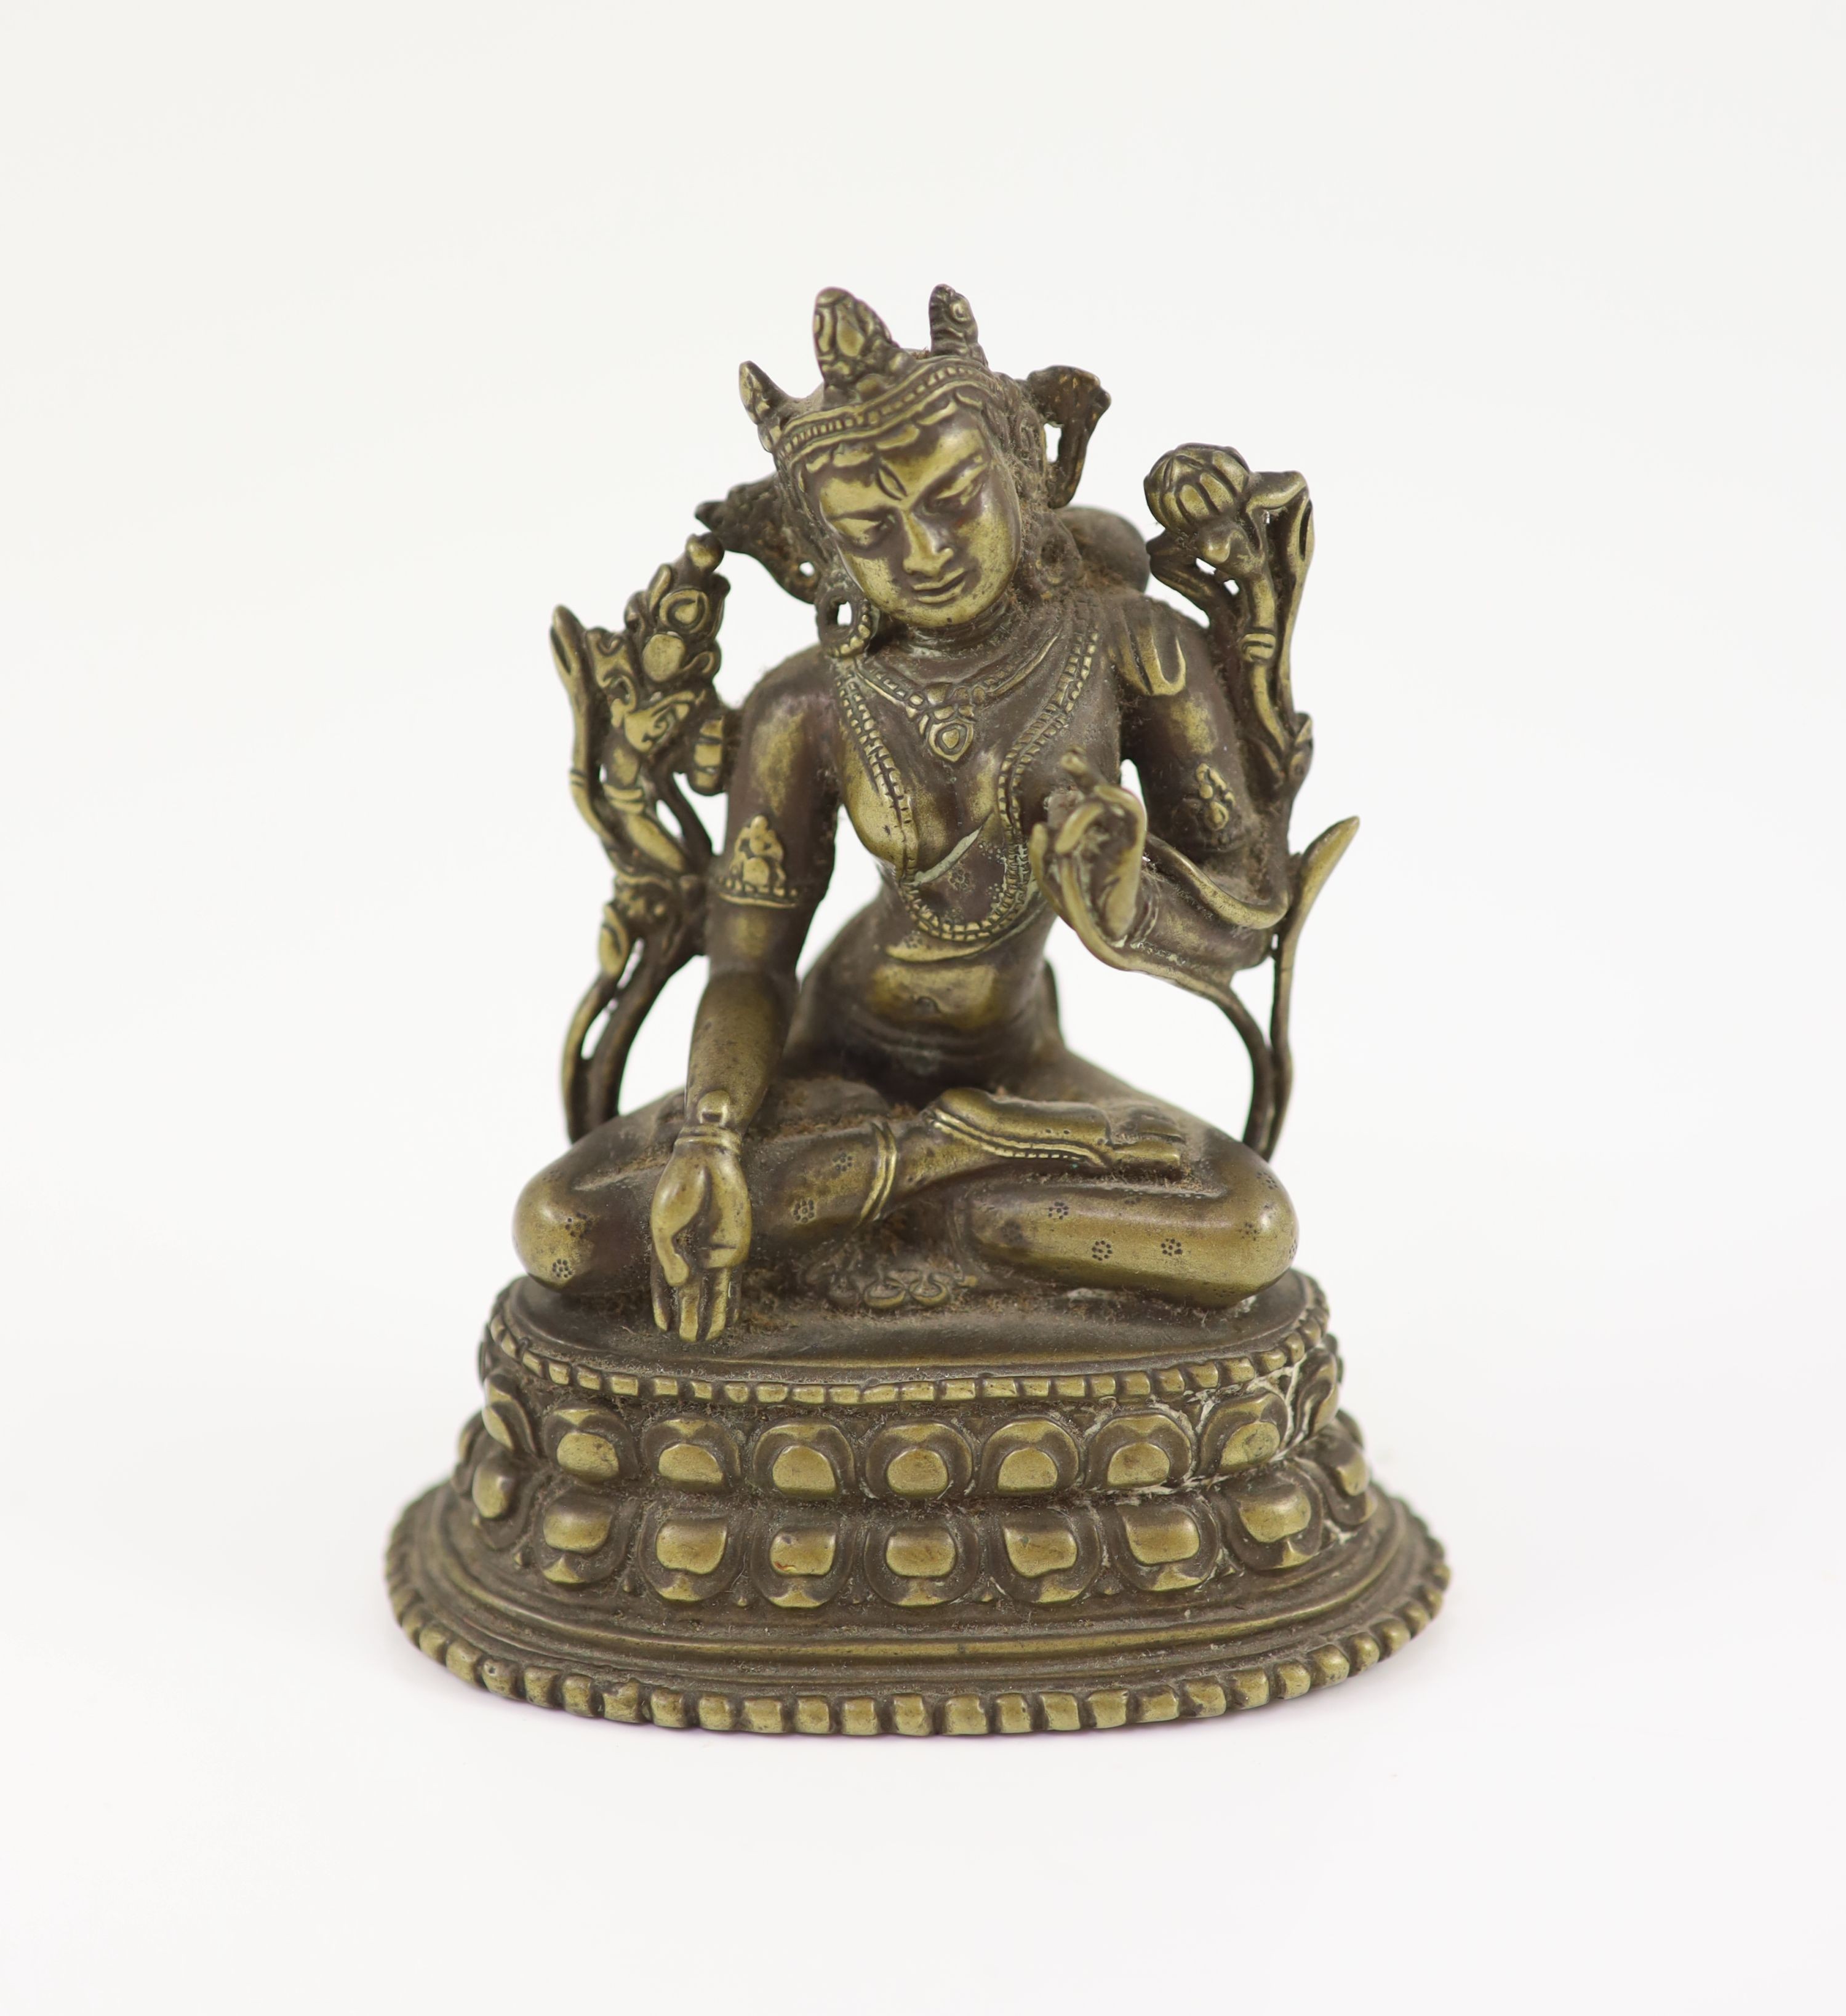 Two Himalayan bronze figures of Bodhisattvas, 19th/20th century, 11.5 and 9.8cm high